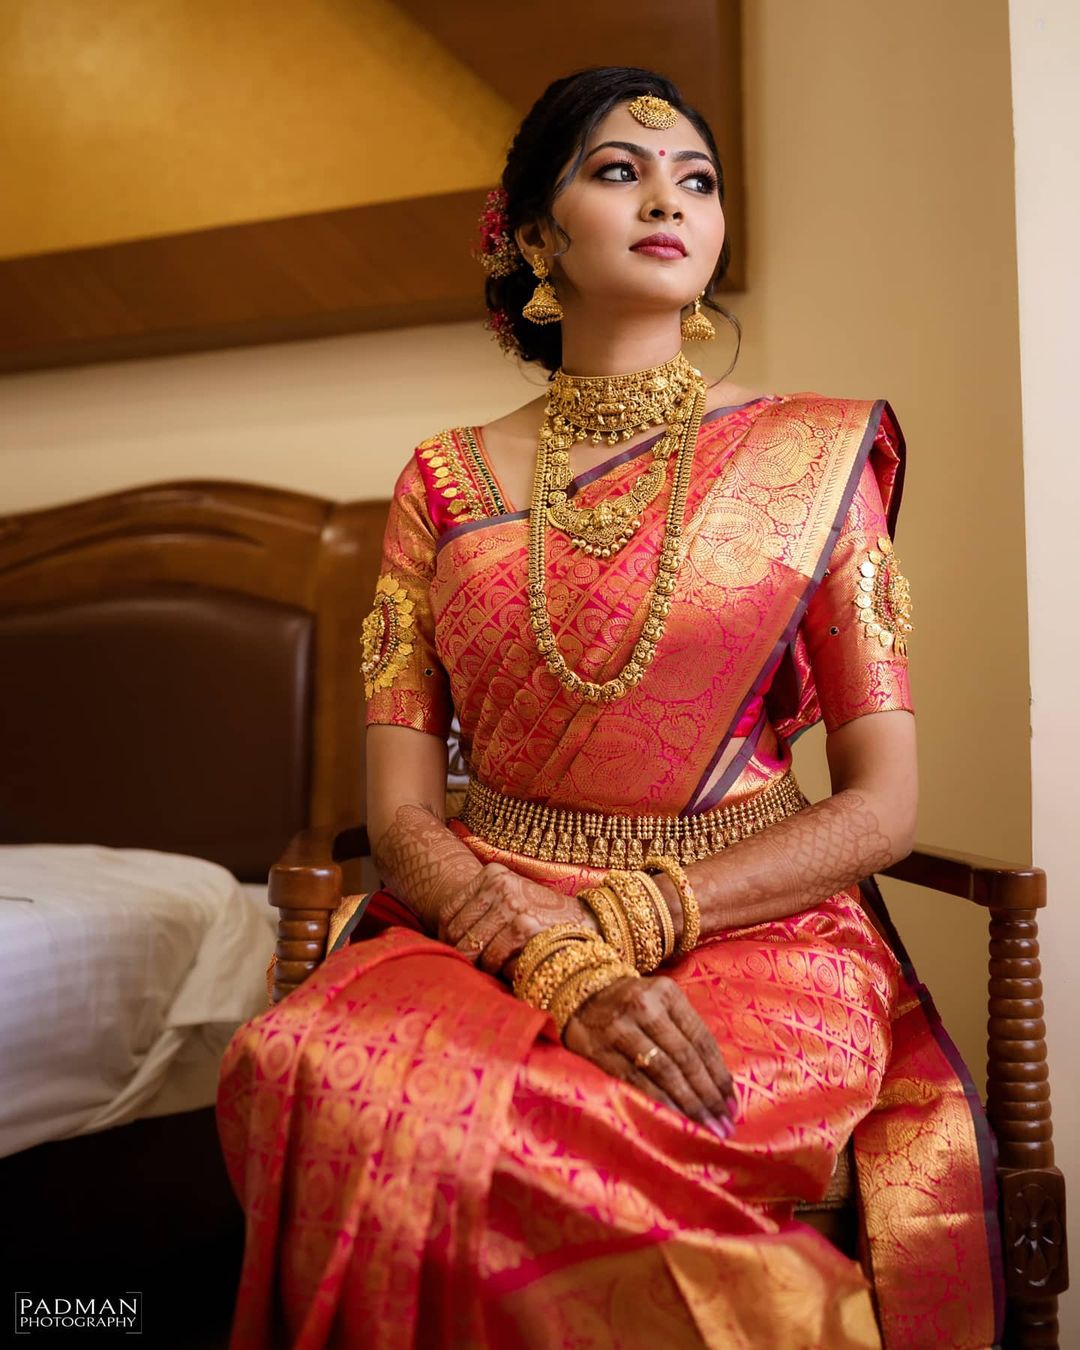 Simple and traditional South Indian bridal look-simple south indian bride-south indian getup female-south indian bride pics-south indian bride photos